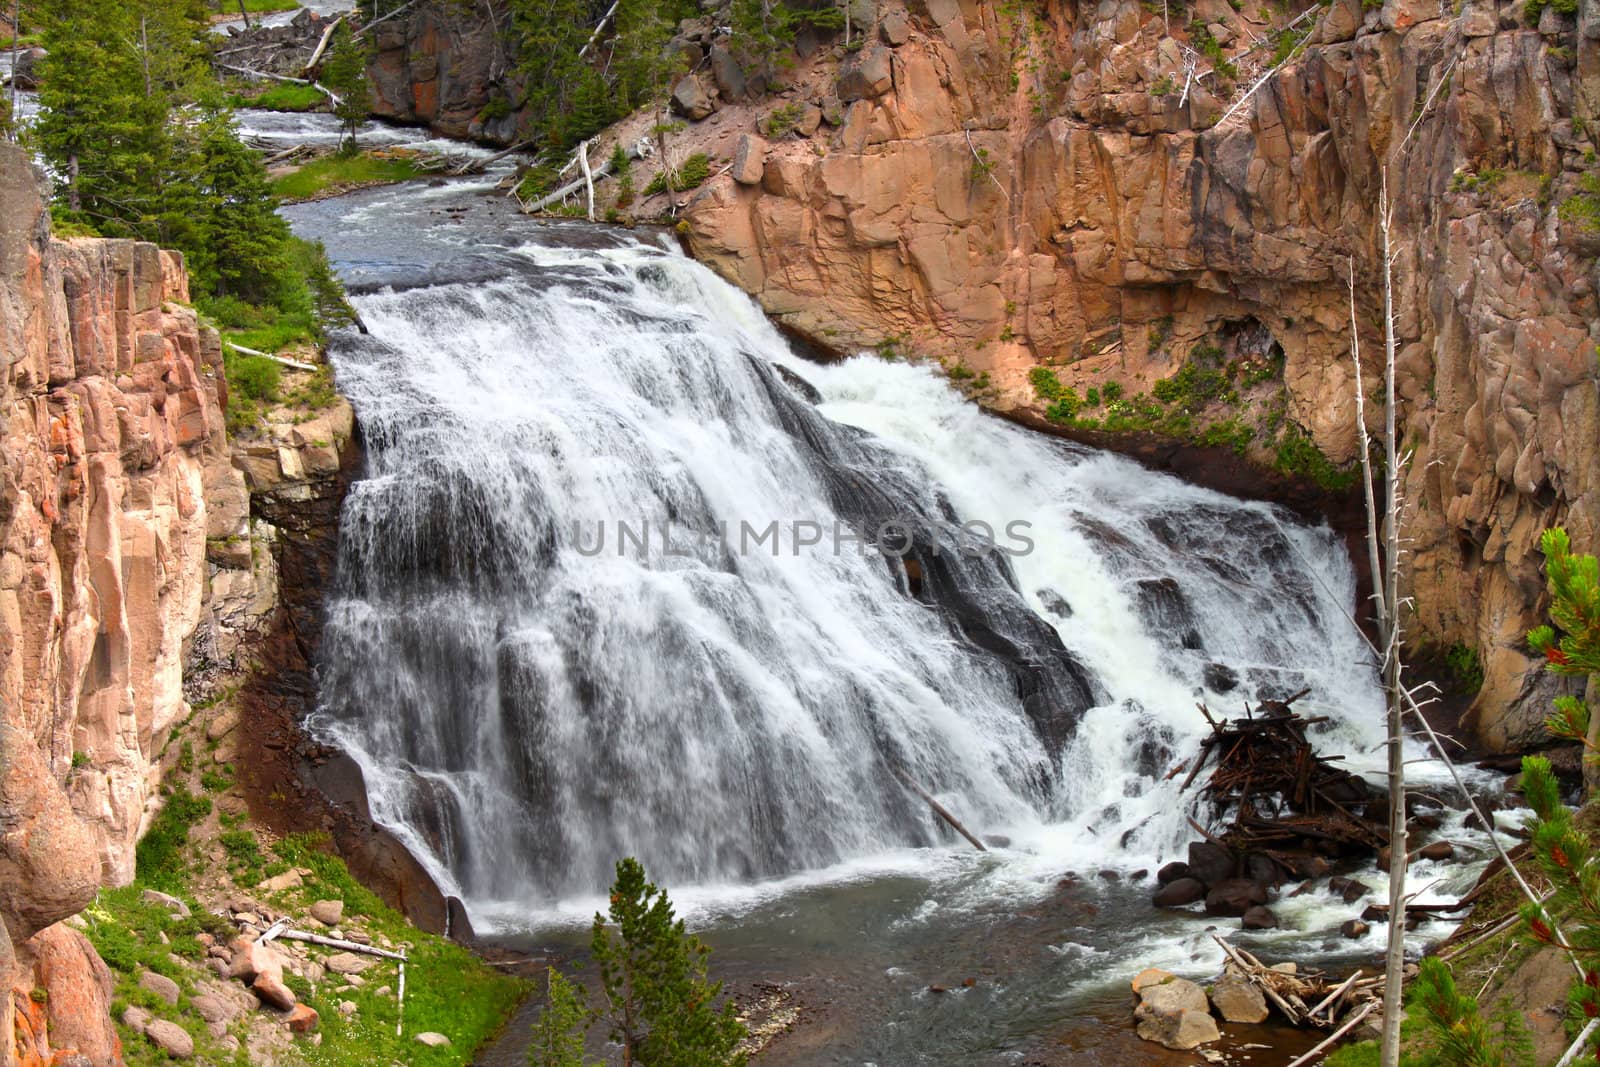 Gibbon Falls lows through the canyons of Yellowstone National Park in the United States.